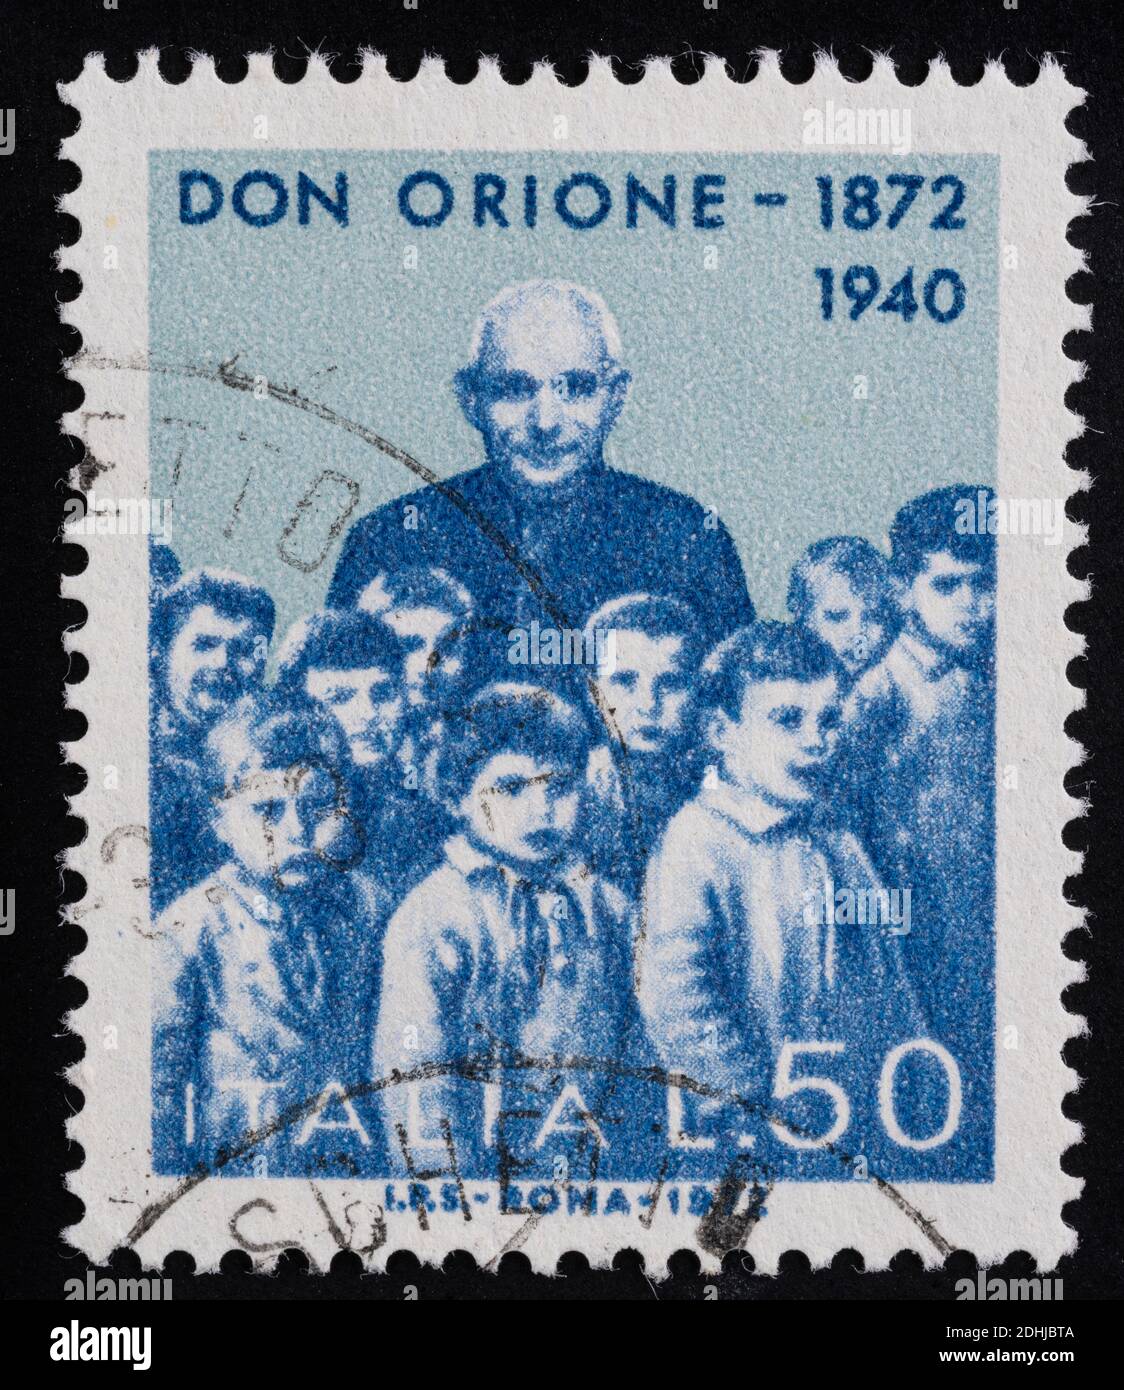 Udine, Italy. December 10, 2020. the commemoration of Don Orione on an Italian postage stamp Stock Photo